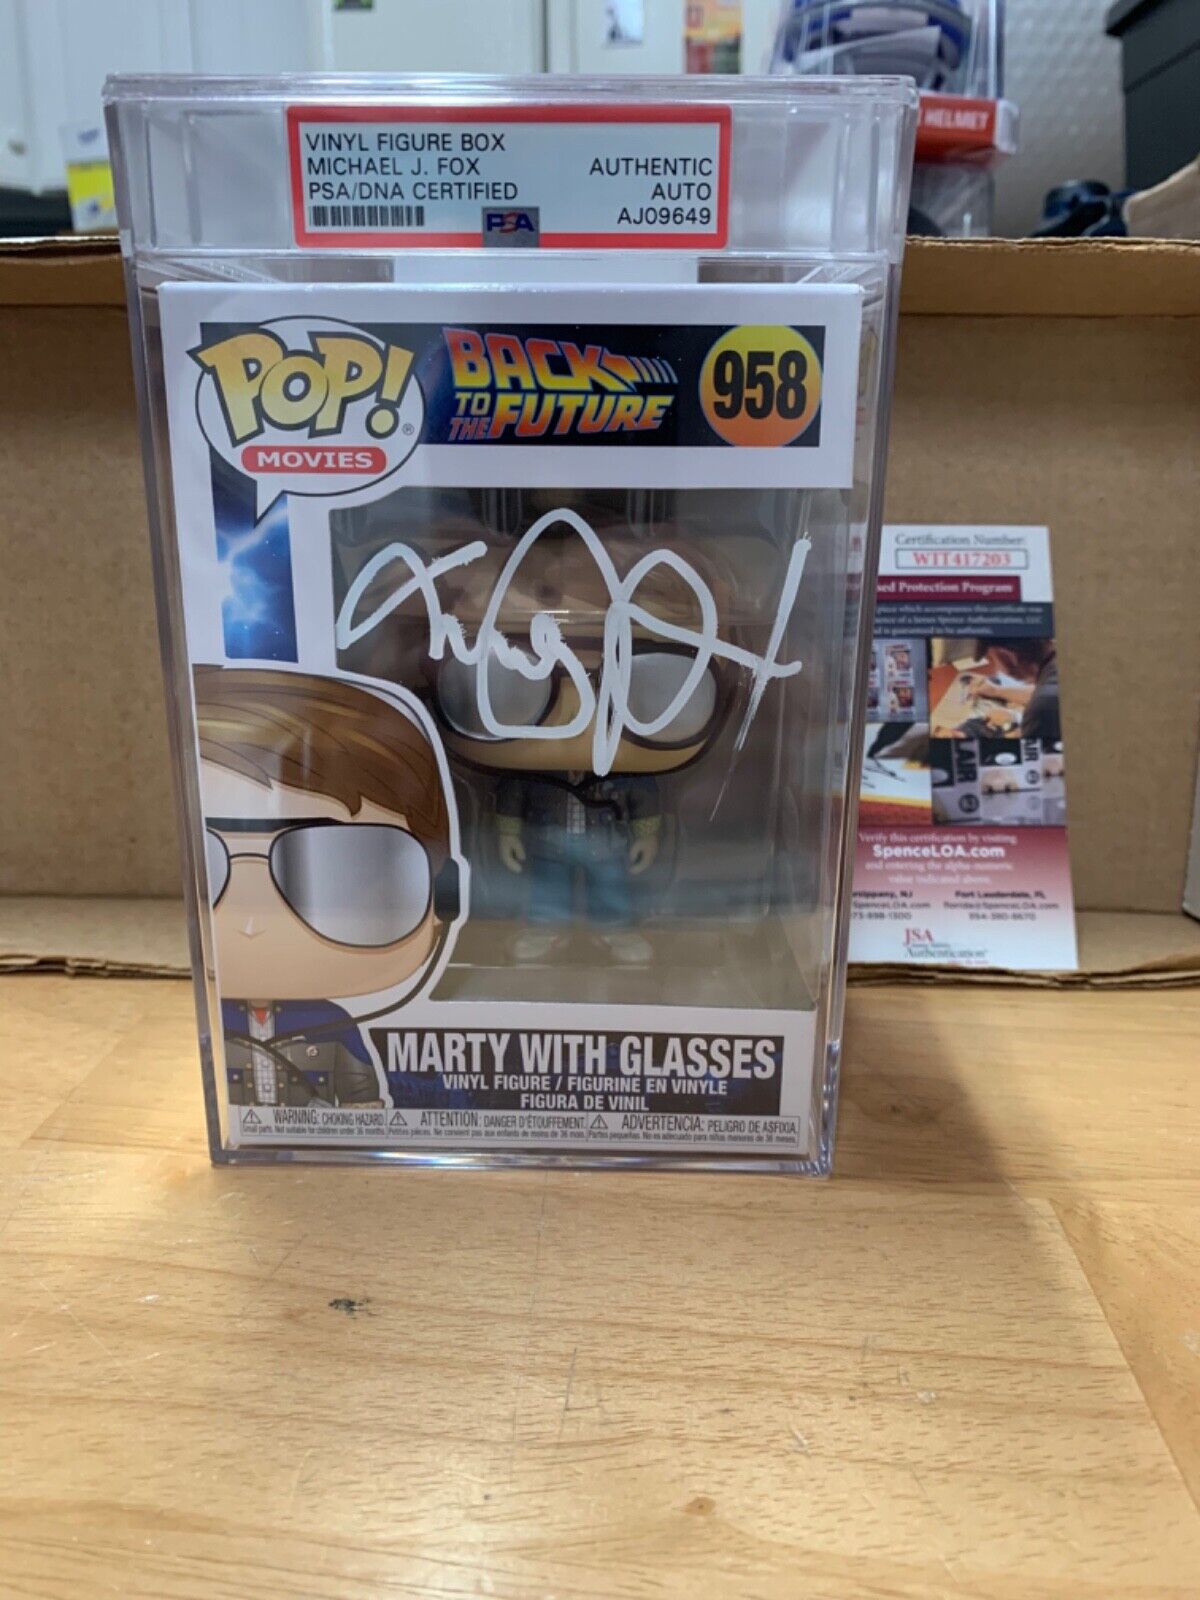 Michael J Fox Signed Funko Pop PSA Slabbed Certified 958 Marty with Glasses D